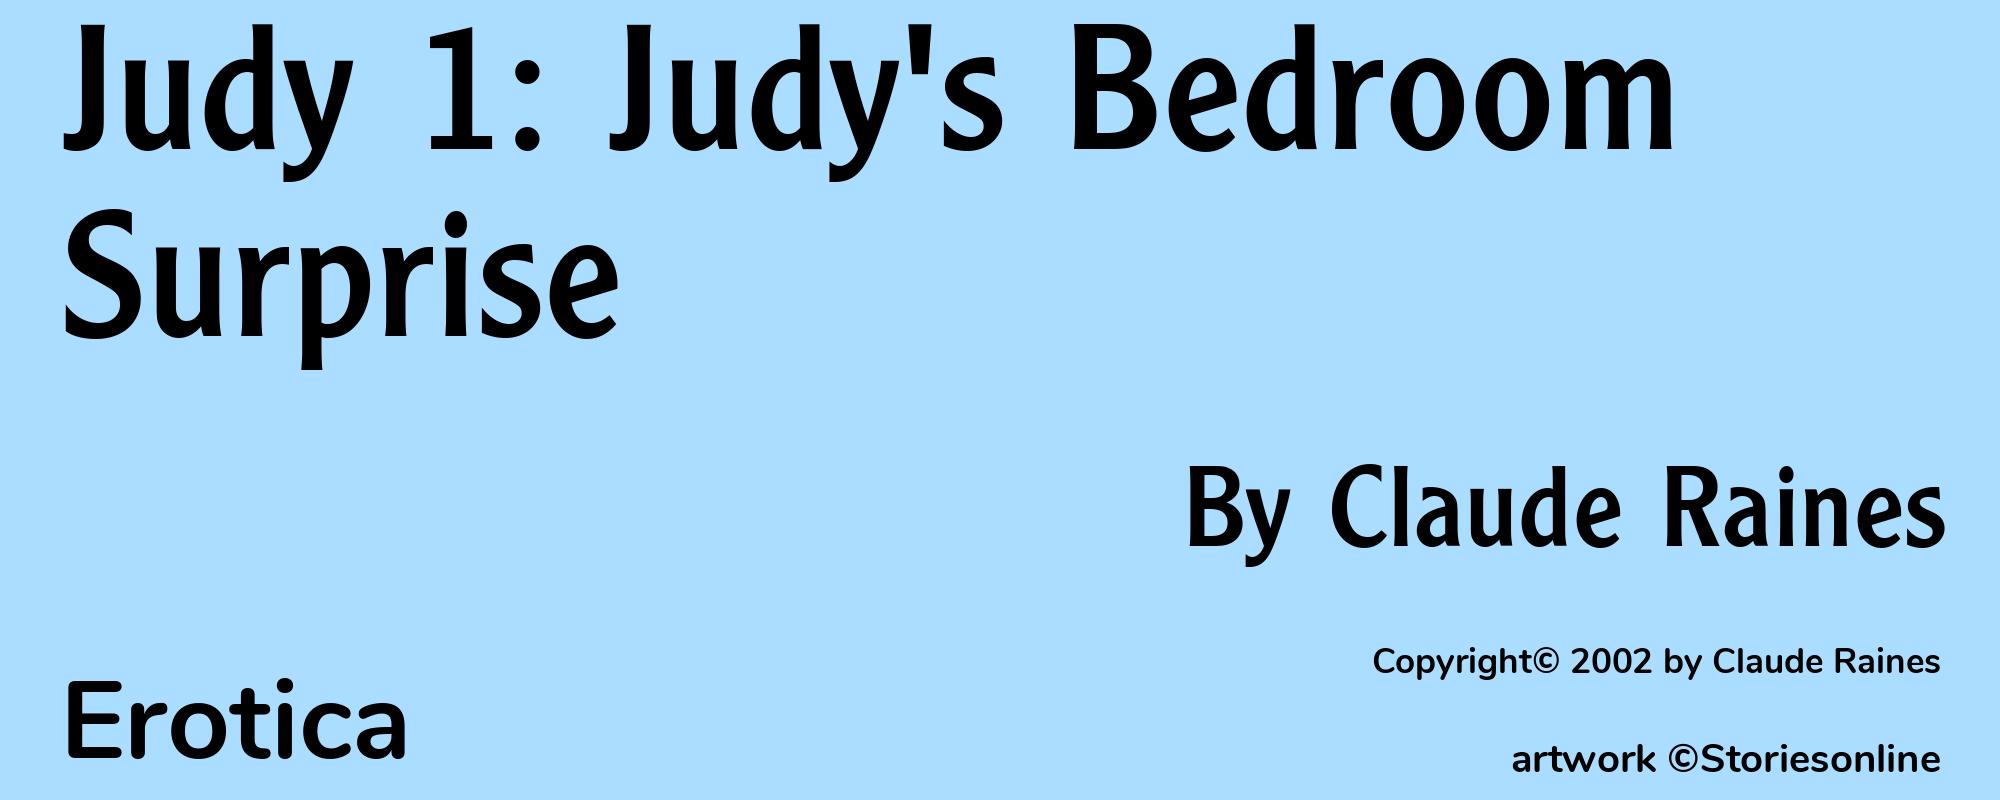 Judy 1: Judy's Bedroom Surprise - Cover